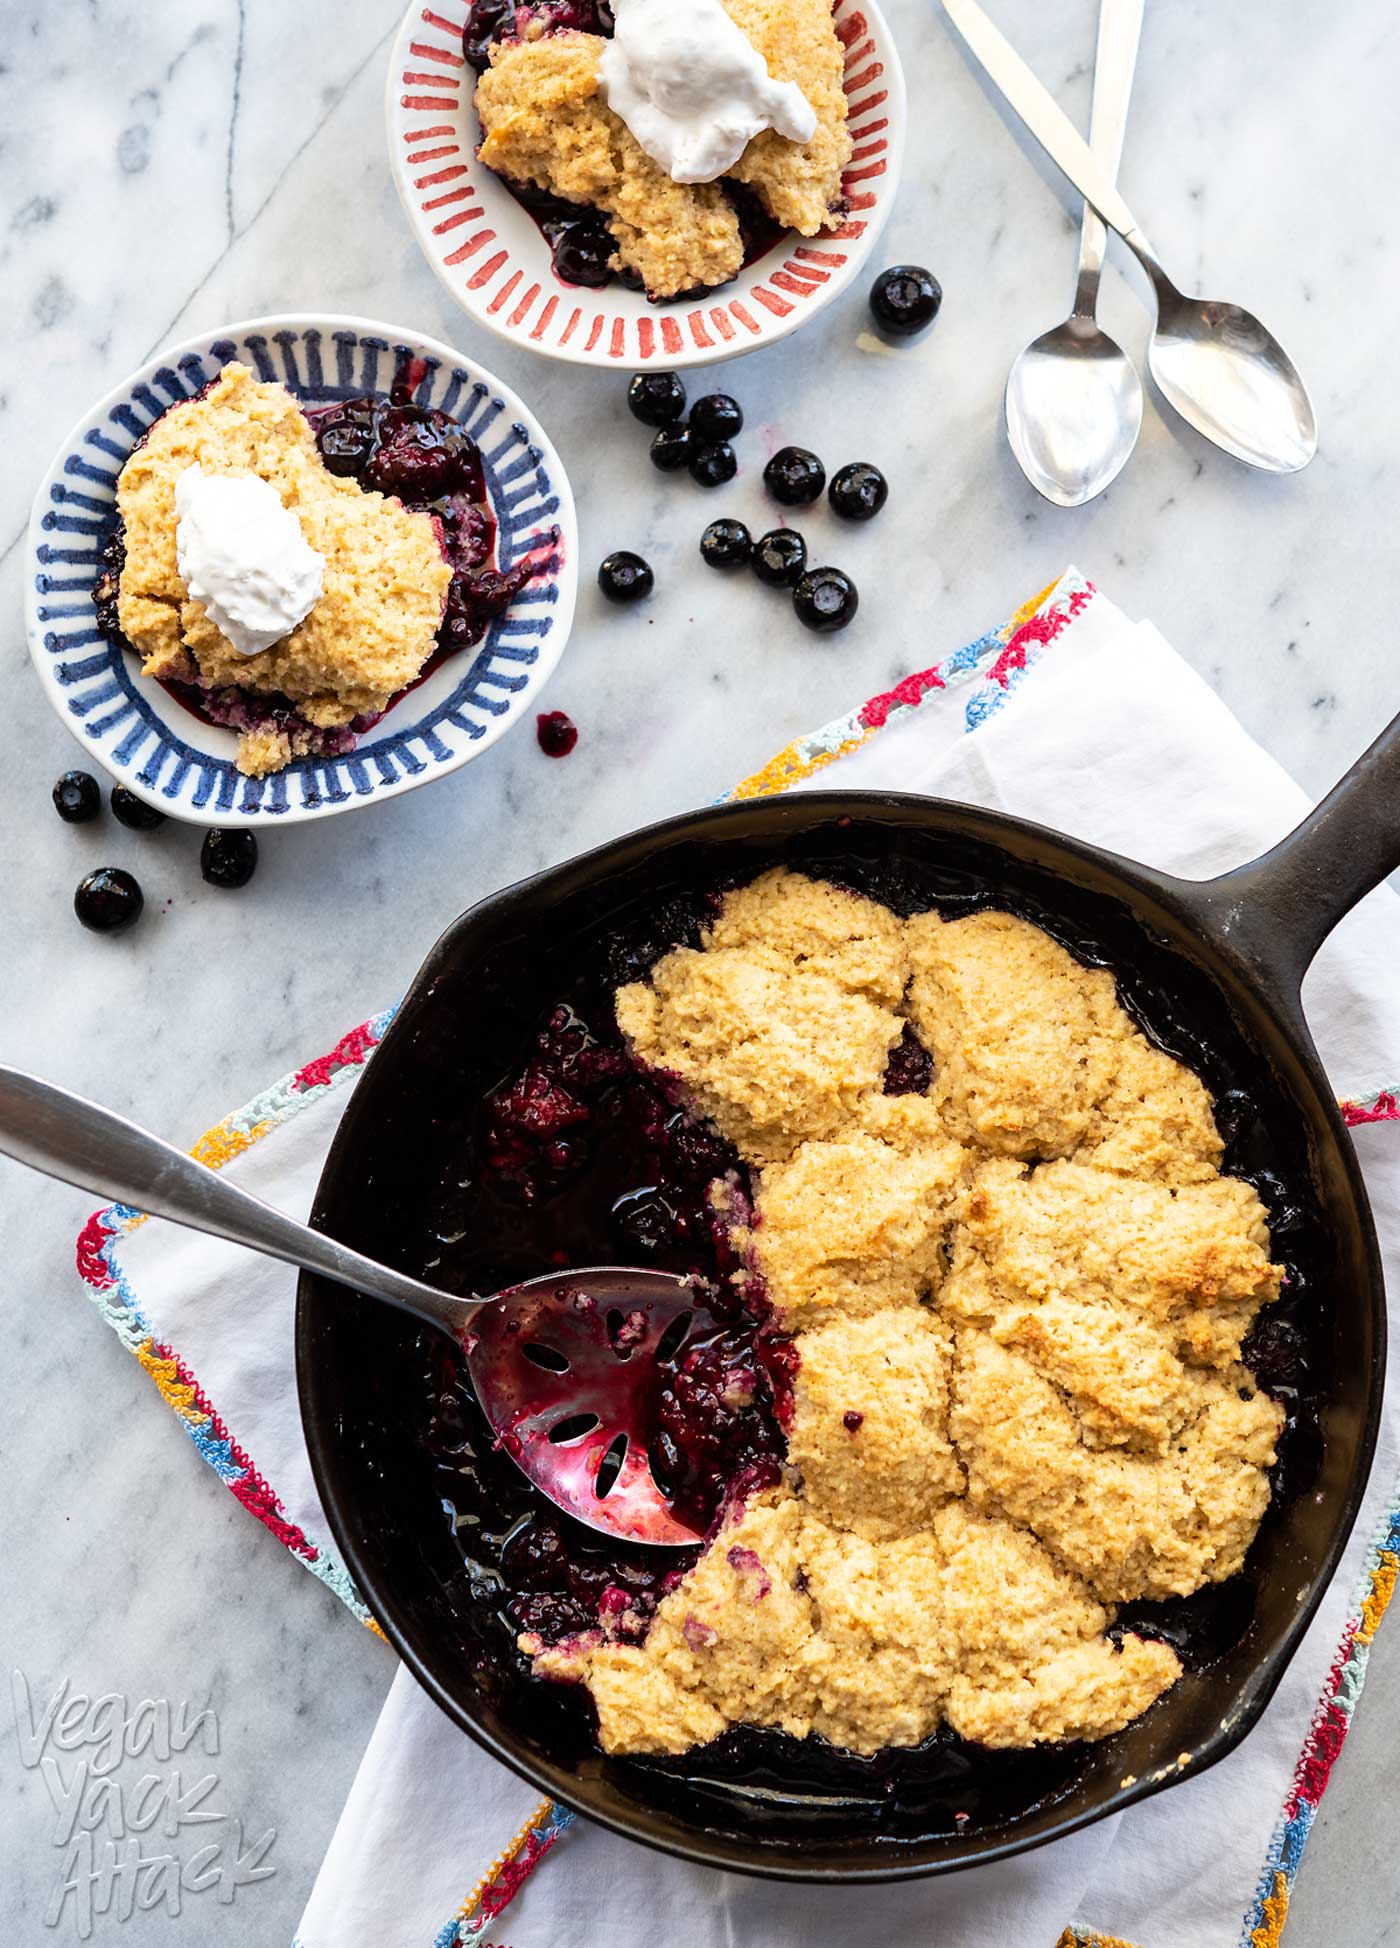 Cast iron skillet of blackberry cobbler with biscuit topping, with small plates of cobbler around it